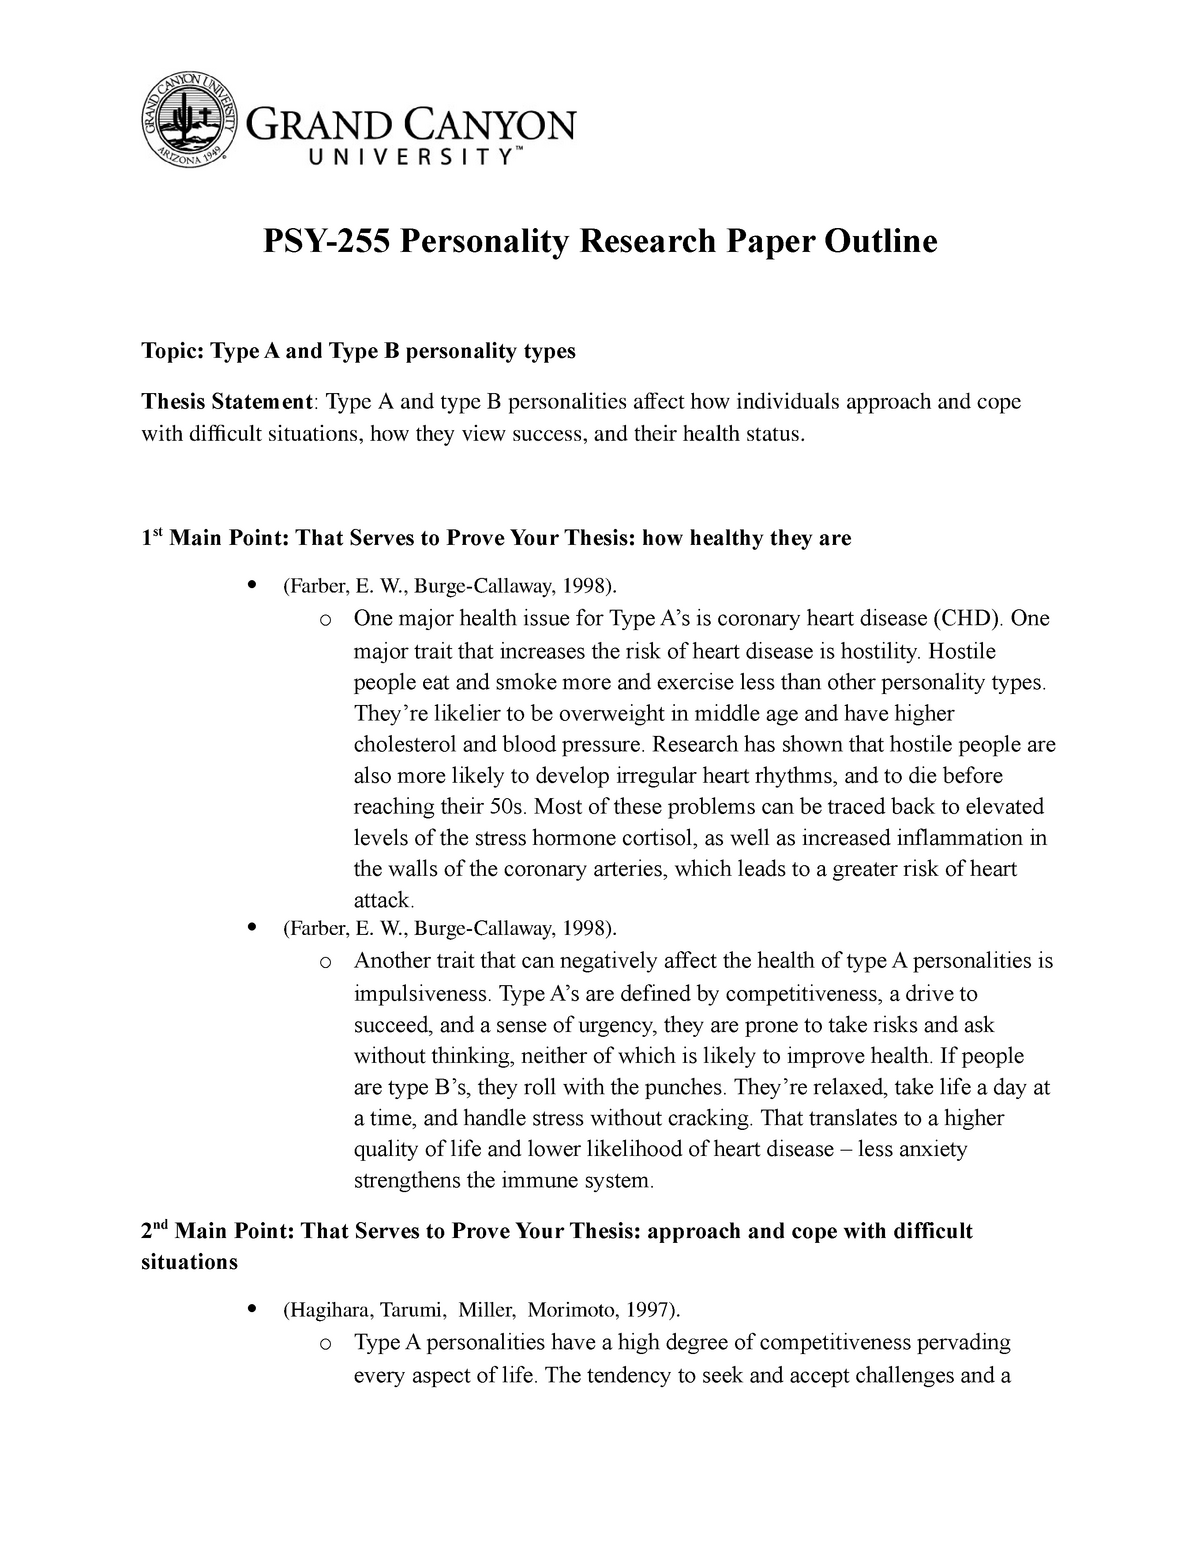 research papers about personality traits